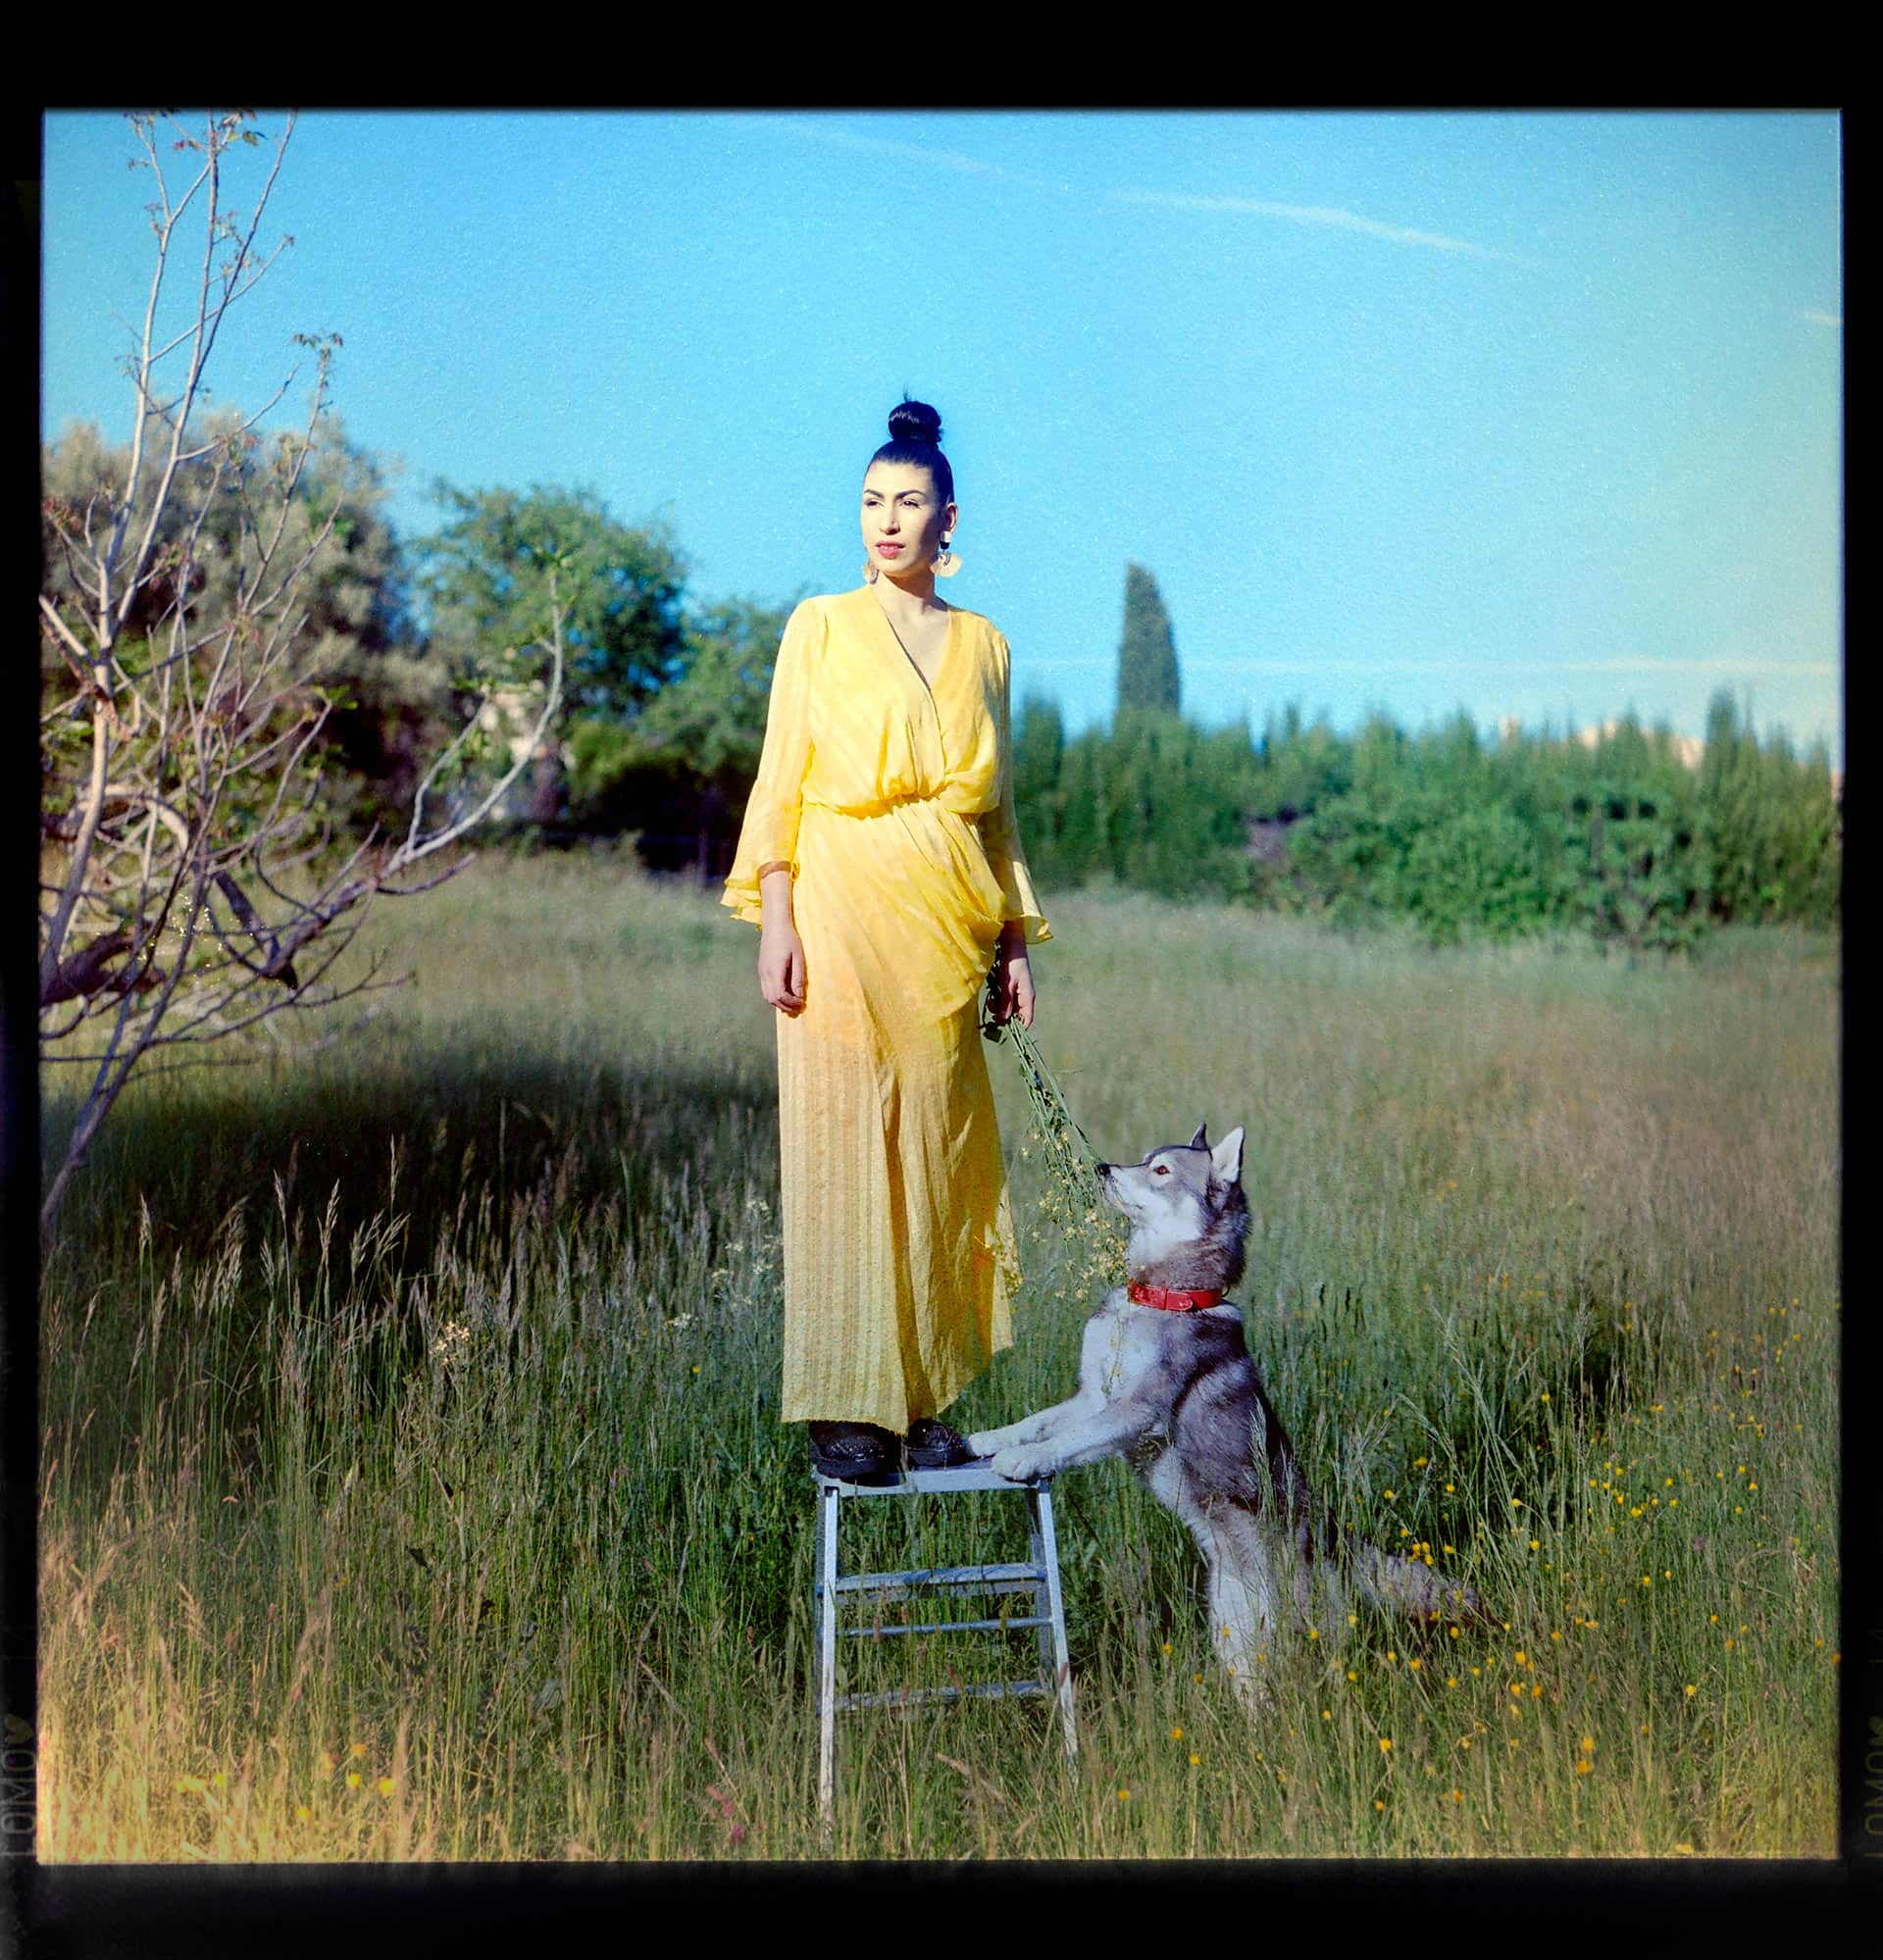 Woman stands on a ladder in a field in a yellow dress and a dog jumps up to smell flowers she is holding